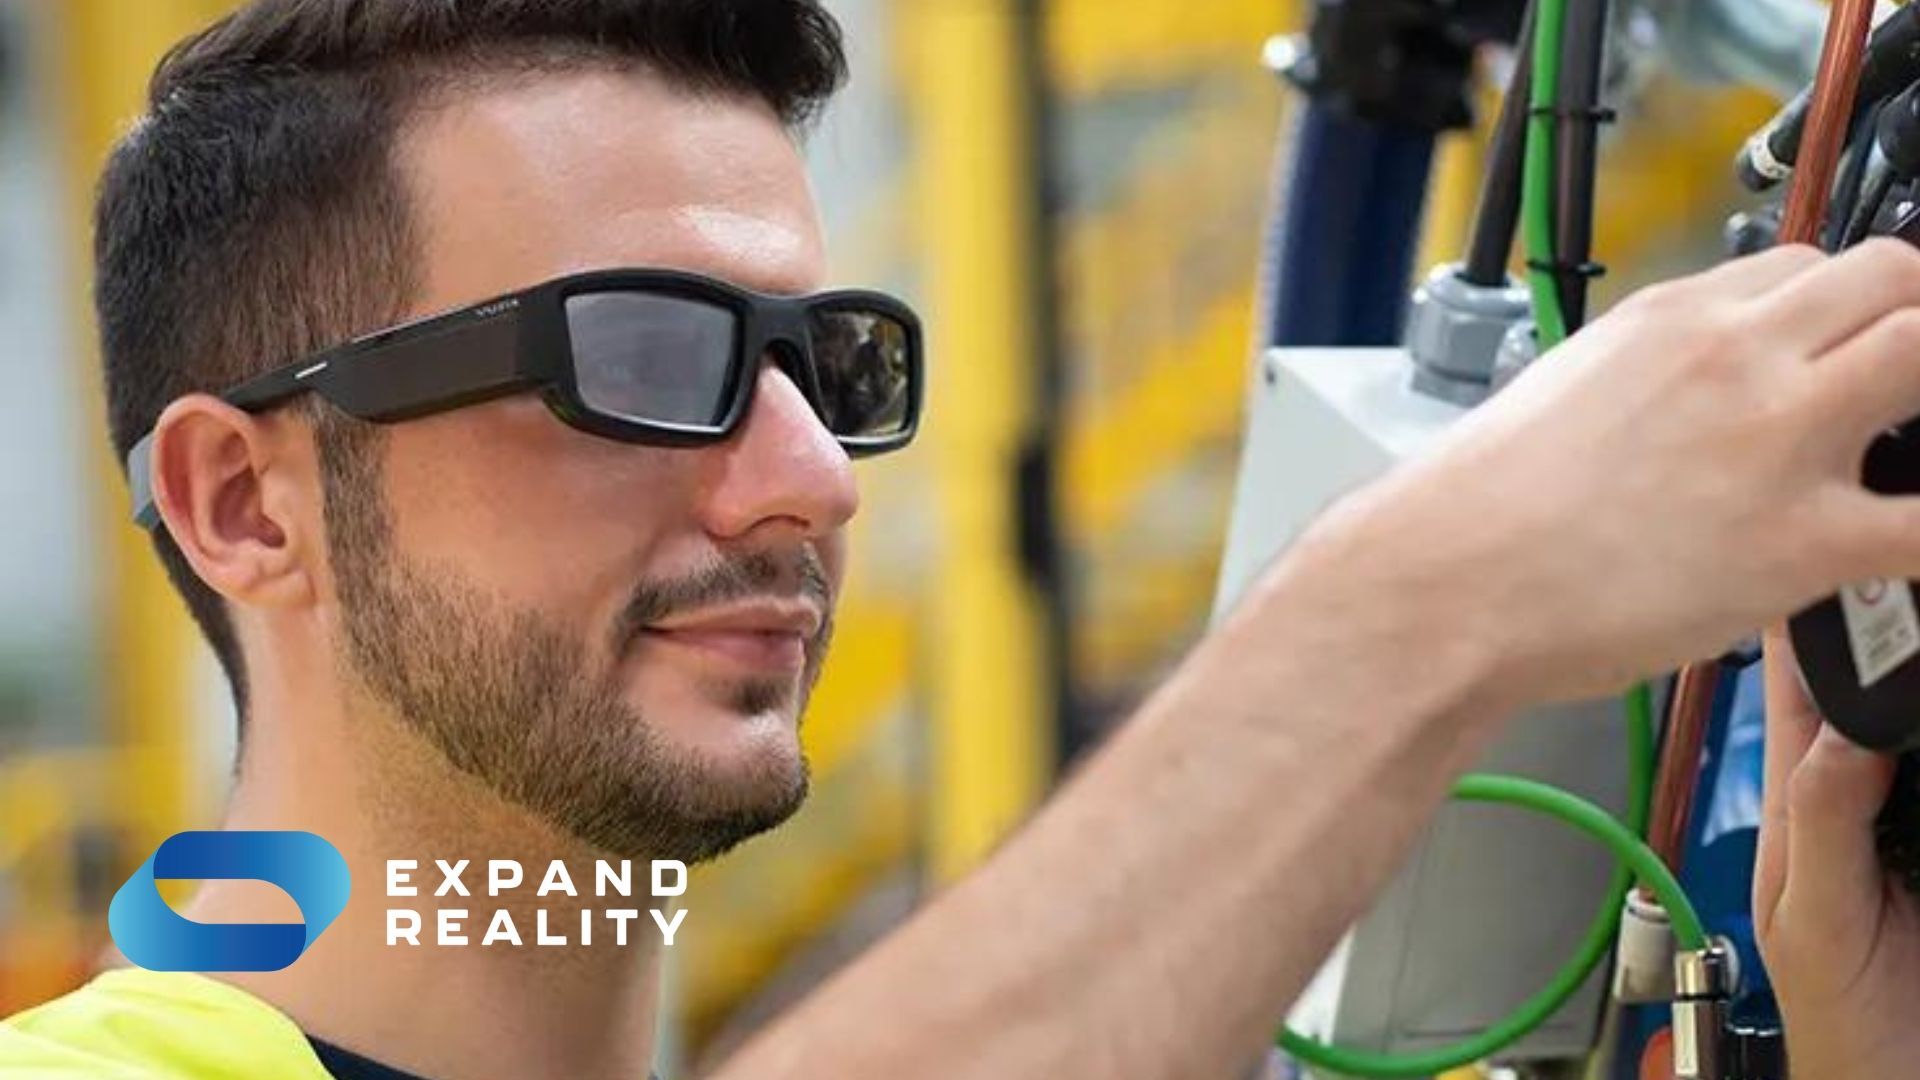 XR has huge potential for quality assurance. Whether you're in manufacturing or healthcare, discover a few ways that XR is changing the game.